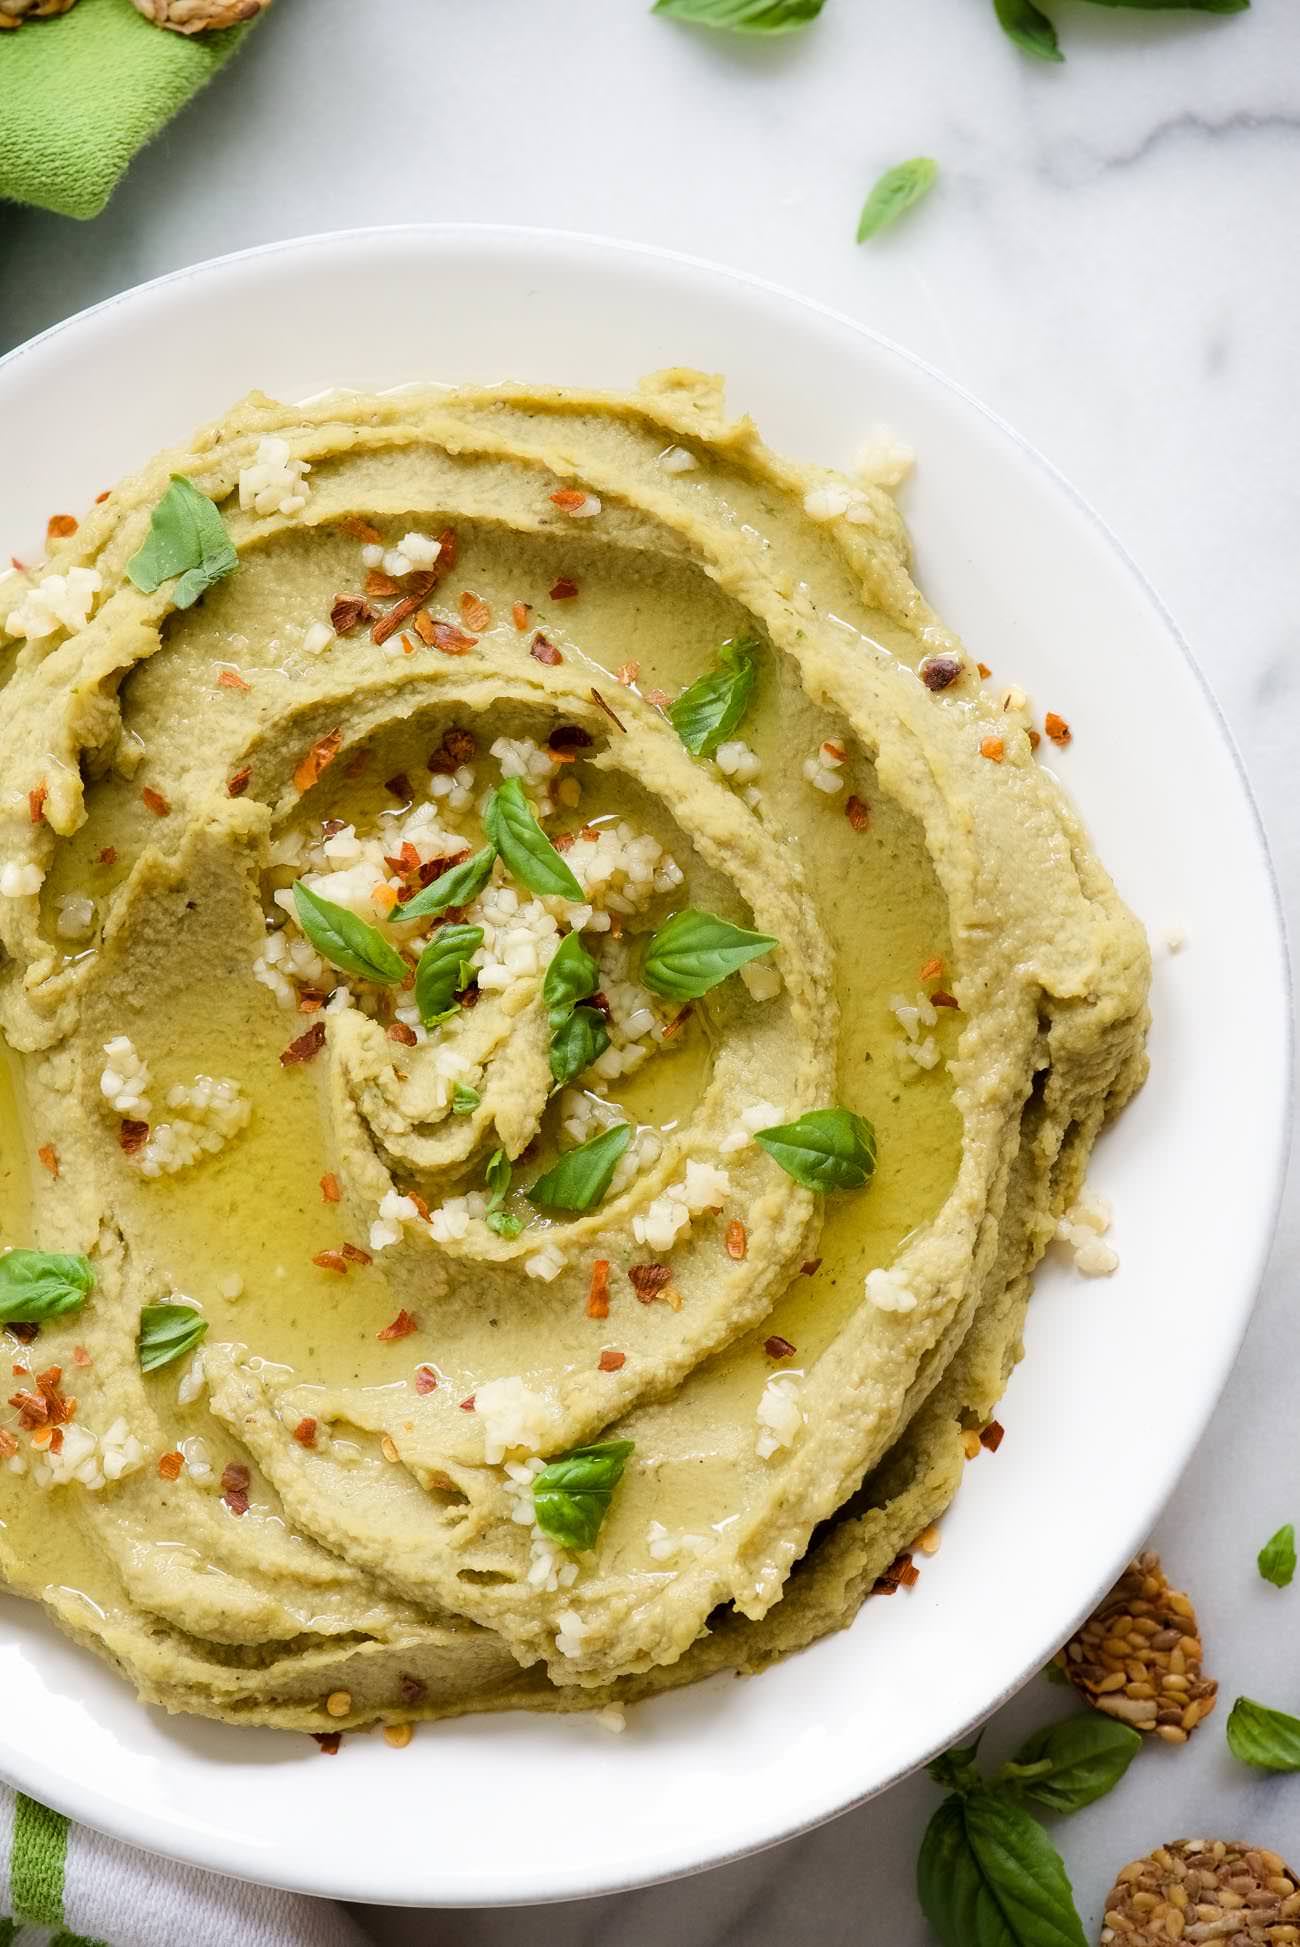 Spicy Basil Hummus is so delicious and with only 7 ingredients, it couldn't be easier to make! Fresh basil, chickpeas and a touch of red pepper take this classic hummus up a few notches!